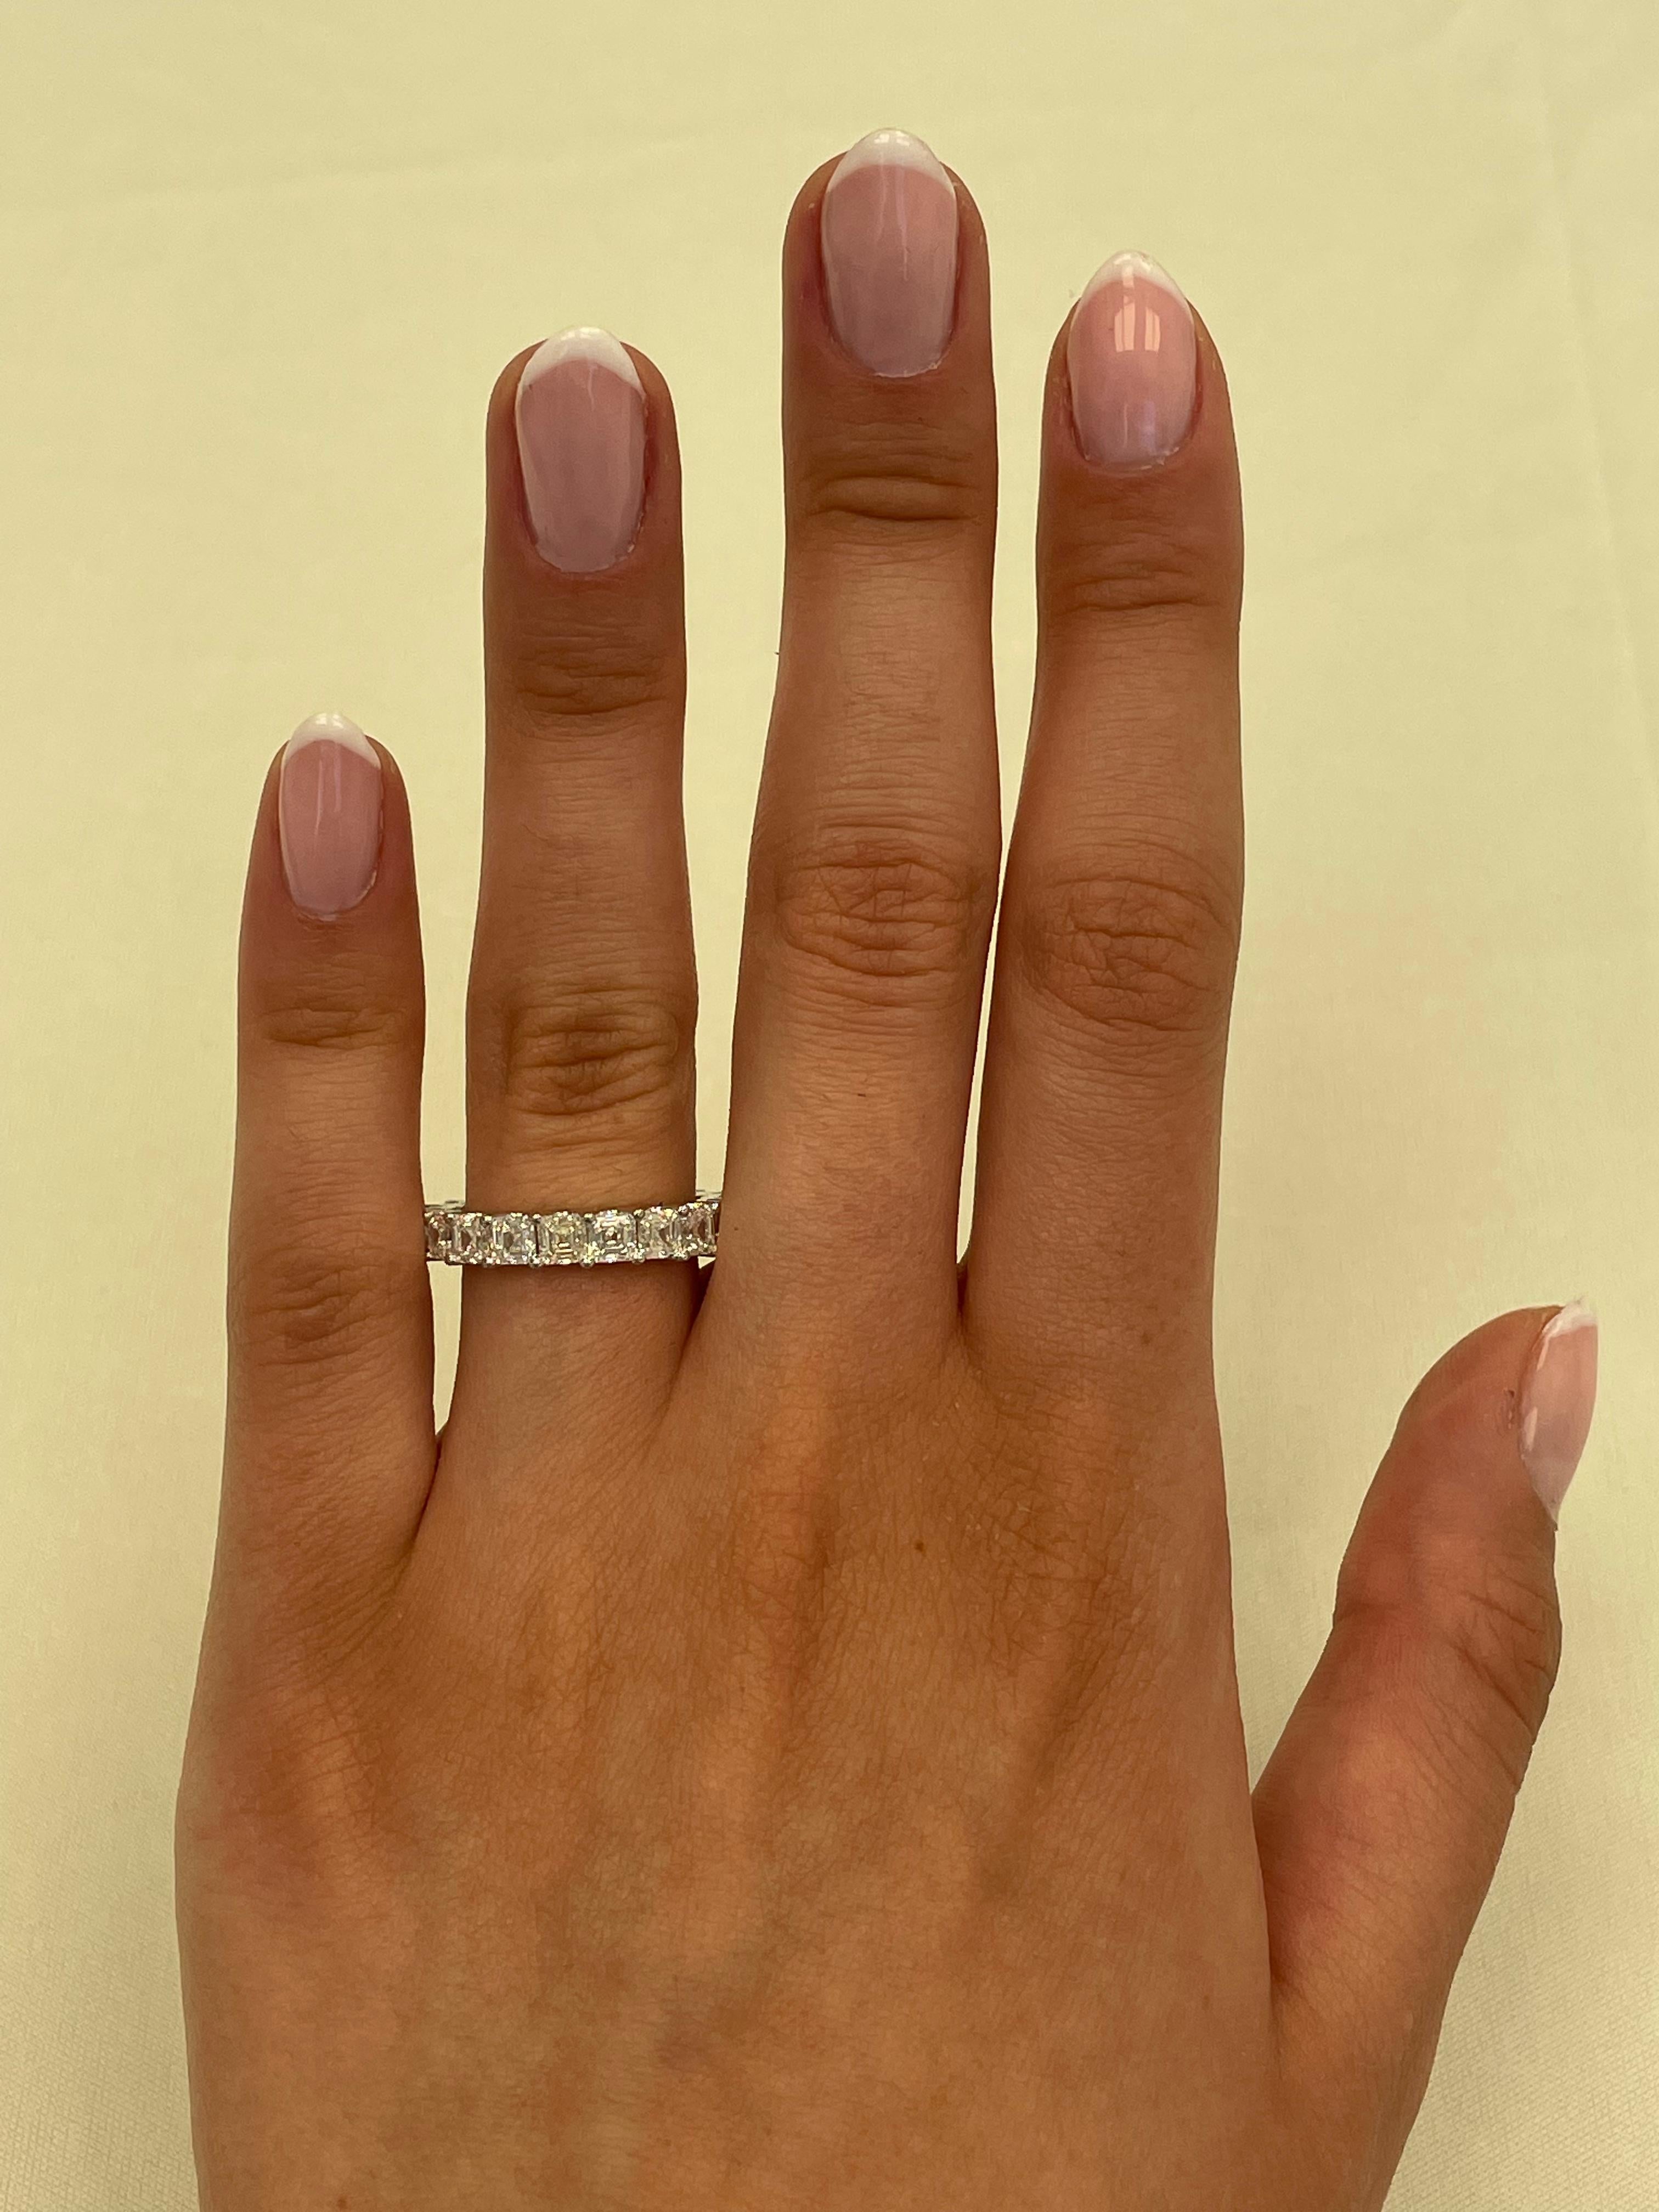 Stunning asscher cut diamond eternity band, By Alexander Beverly Hills.
20 asscher cut diamonds, 4.09 carats. D/E color and VVS clarity. 18-karat white gold, 4.09 grams, size 6.5. 
Accommodated with an up to date appraisal by a GIA G.G. upon